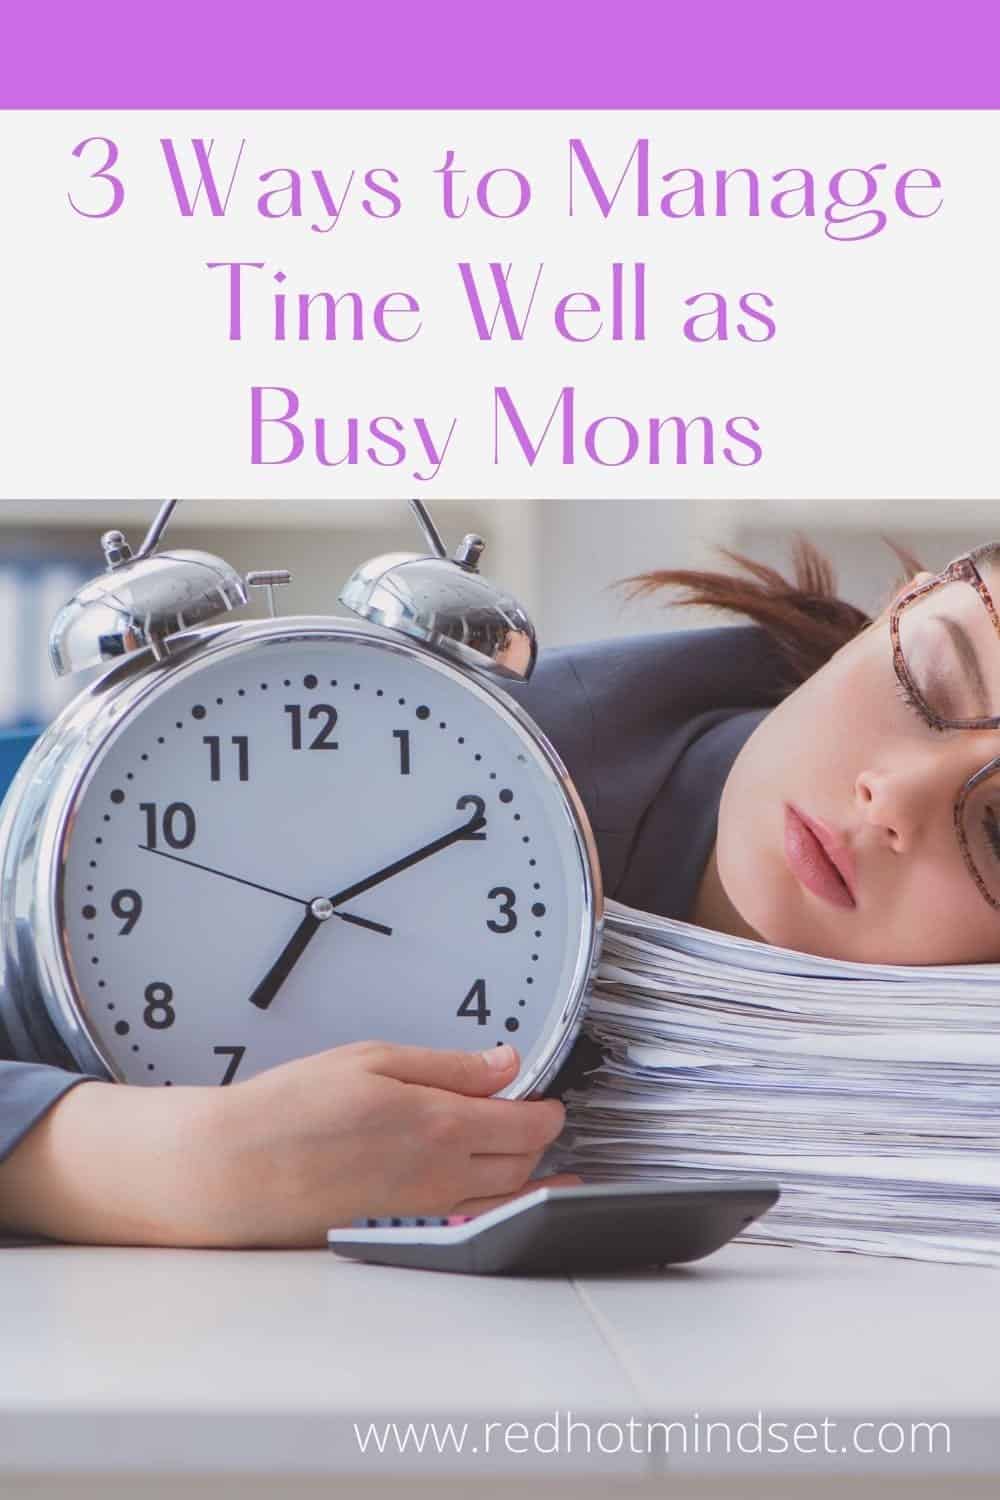 Ep 166 | 3 Ways to Manage Time Well as a Busy Mom